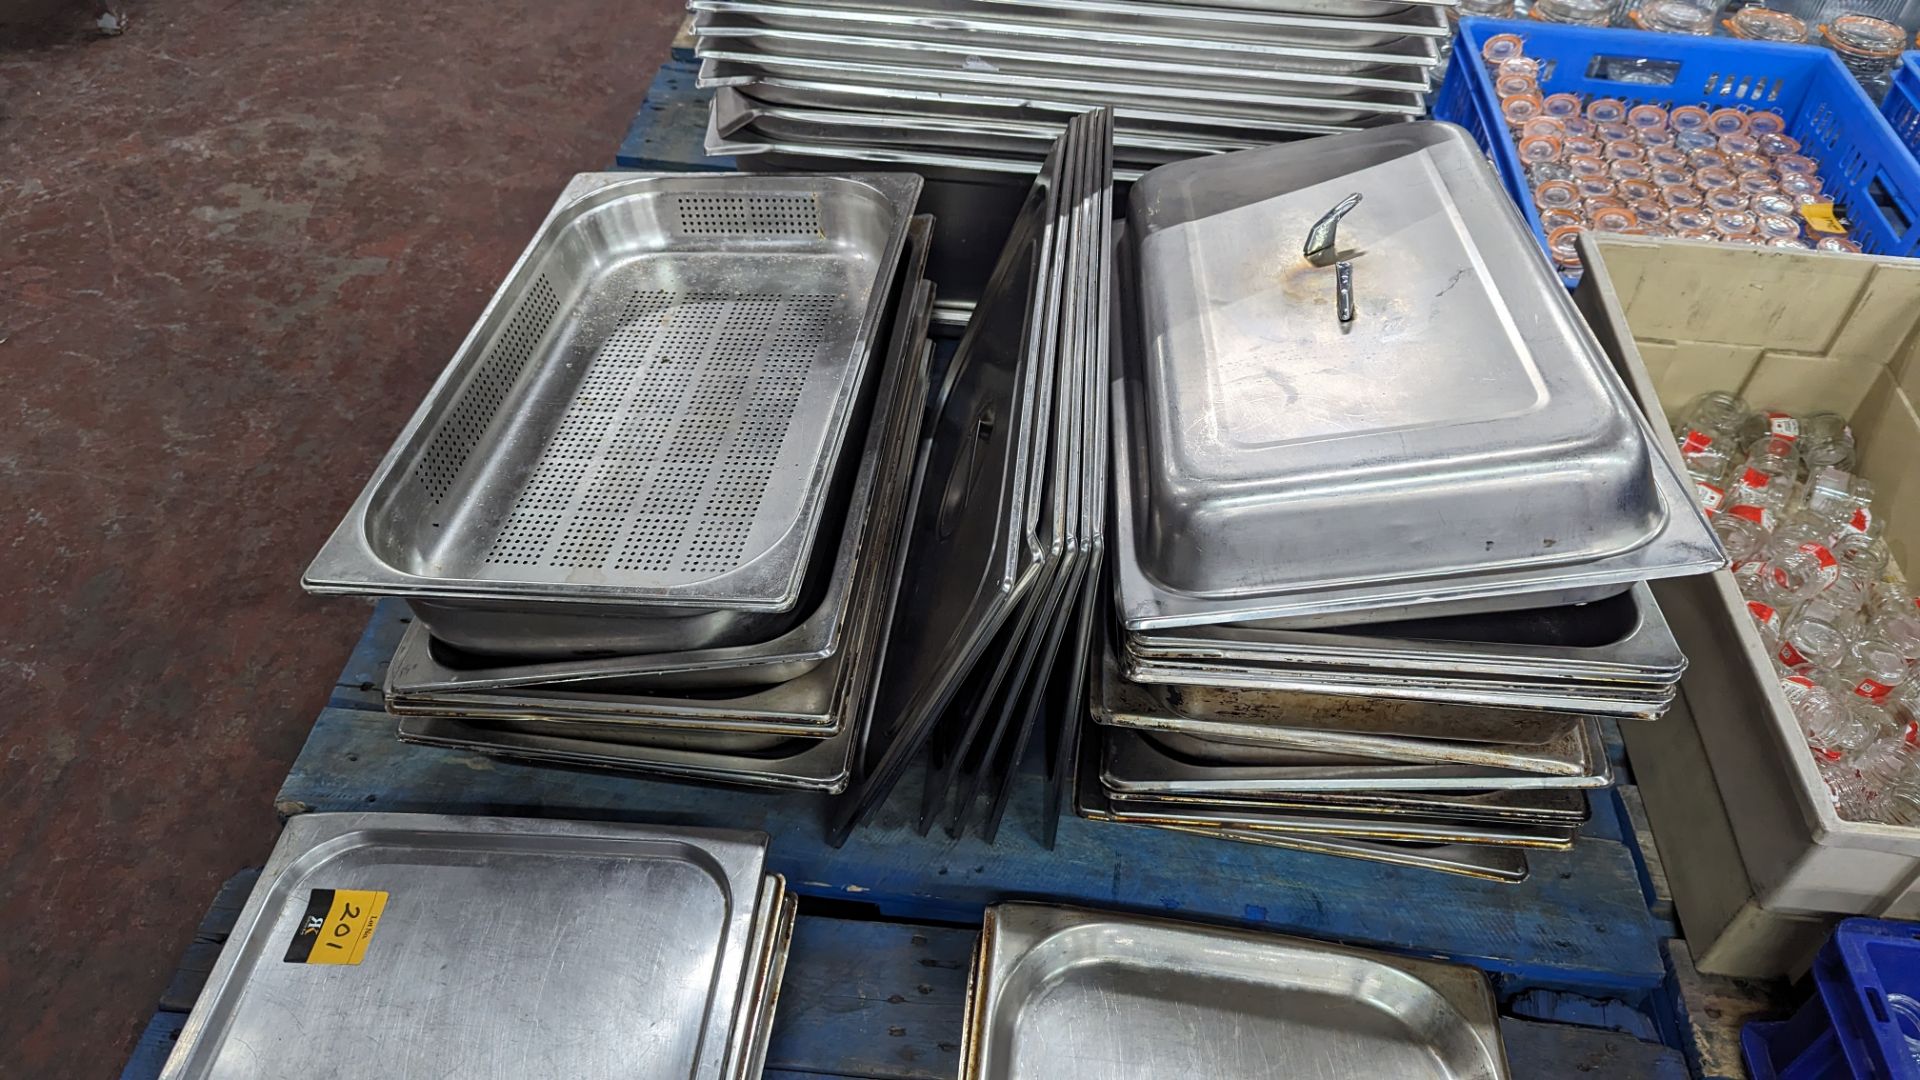 Row of assorted stainless steel trays including perforated & lids for use with same - approximately - Image 4 of 4